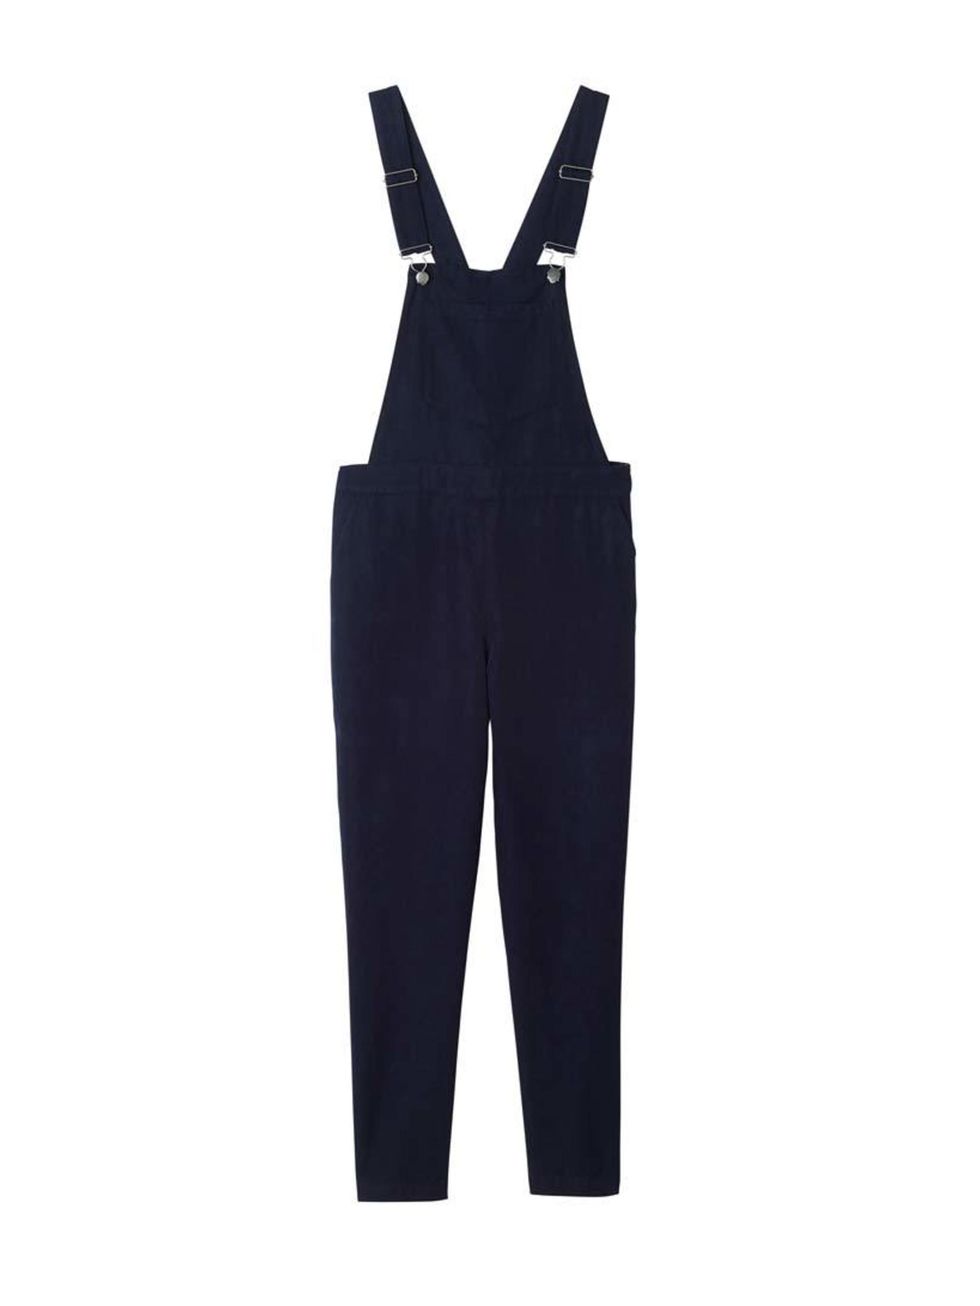 Perfect over a chunky knit jumper.

Monki dungarees, £40